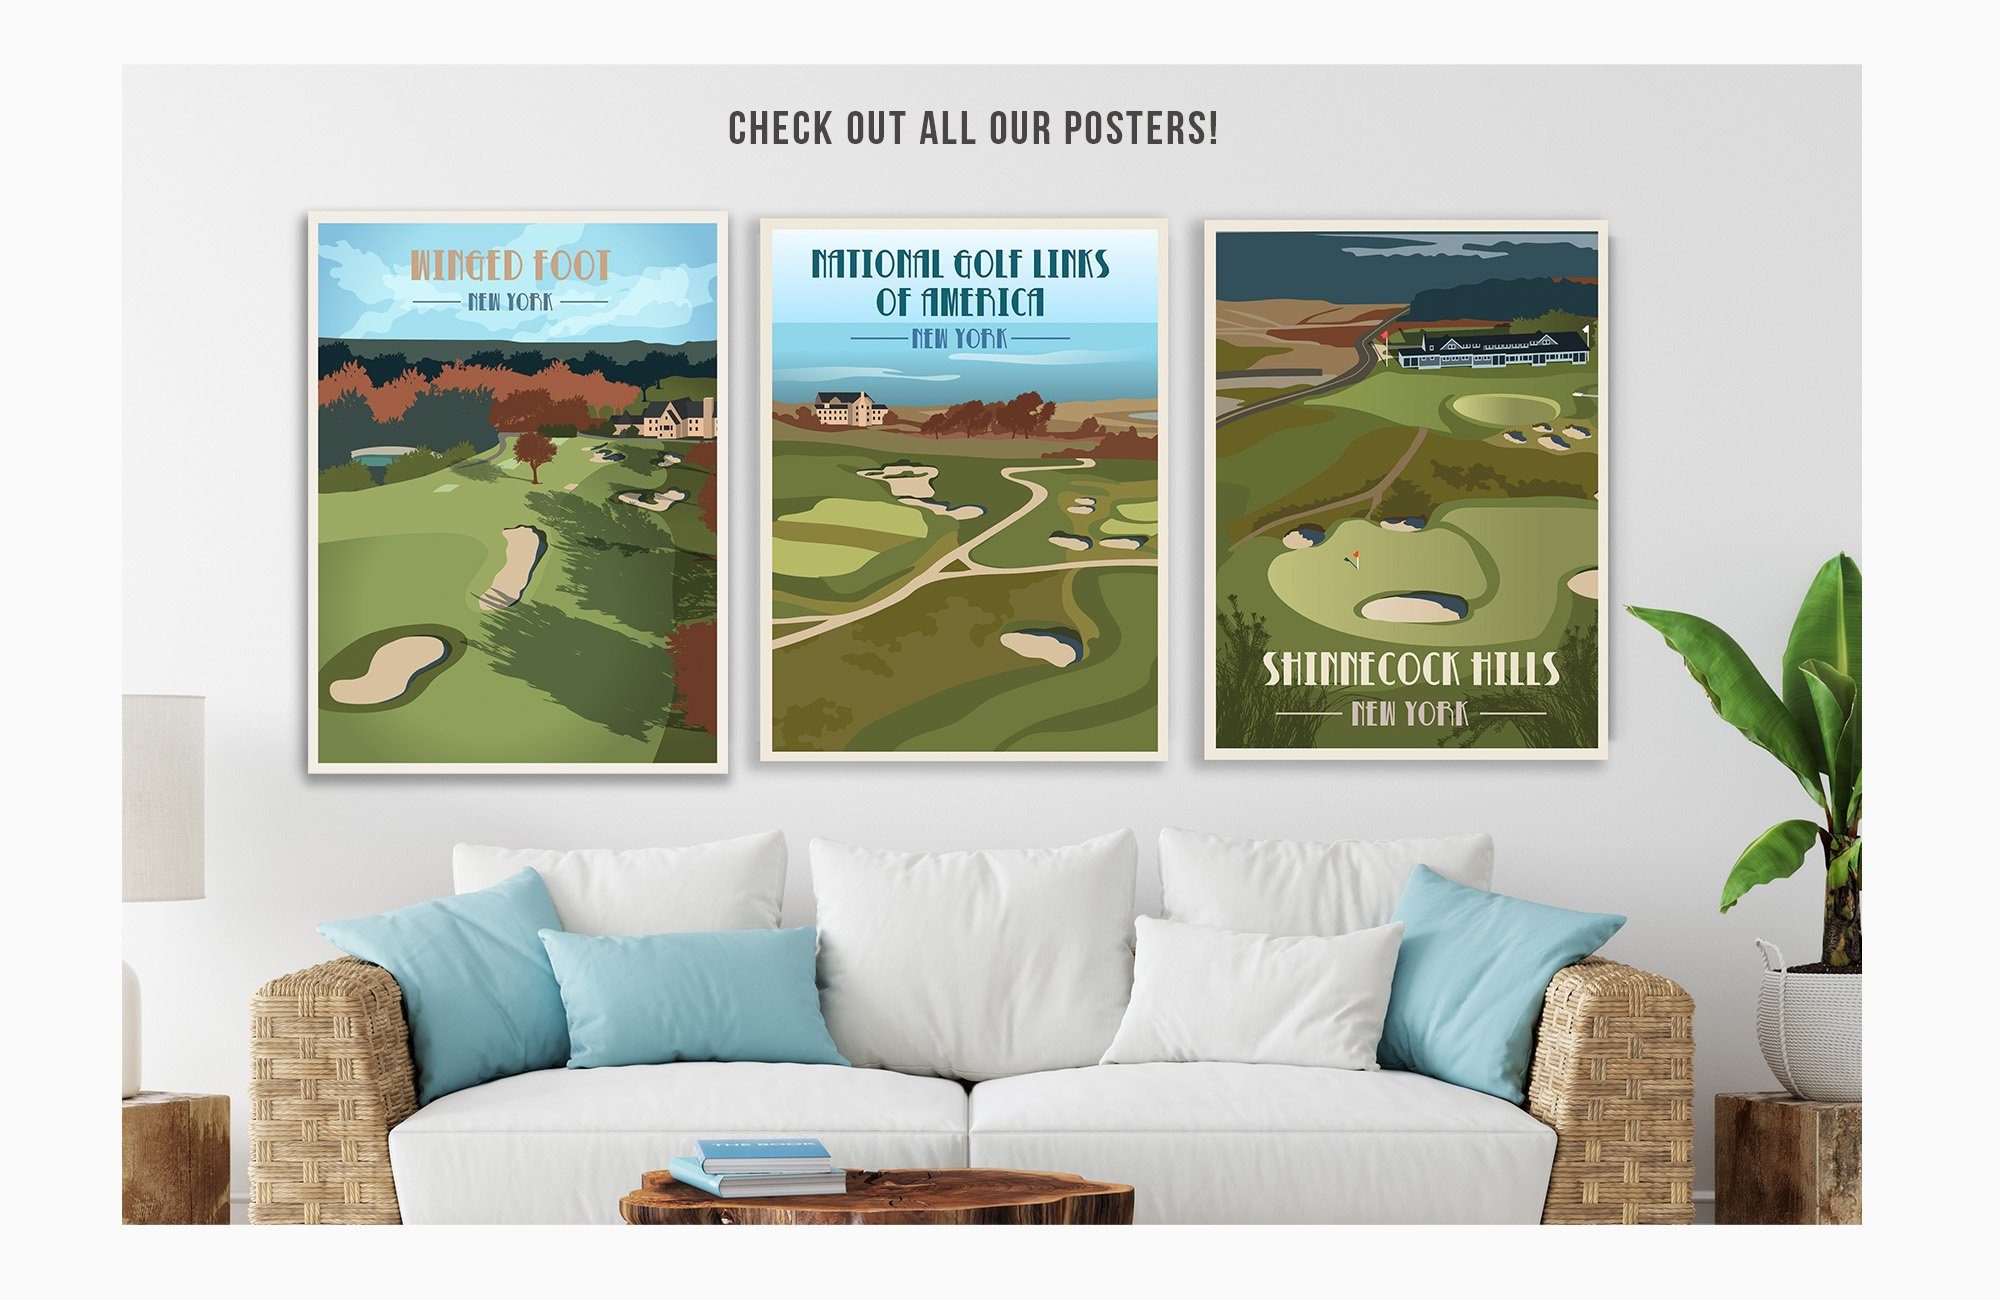 Winged Foot Golf Club Poster, New York, Golf Clubs of America, Unframed Map World Vibe Studio 